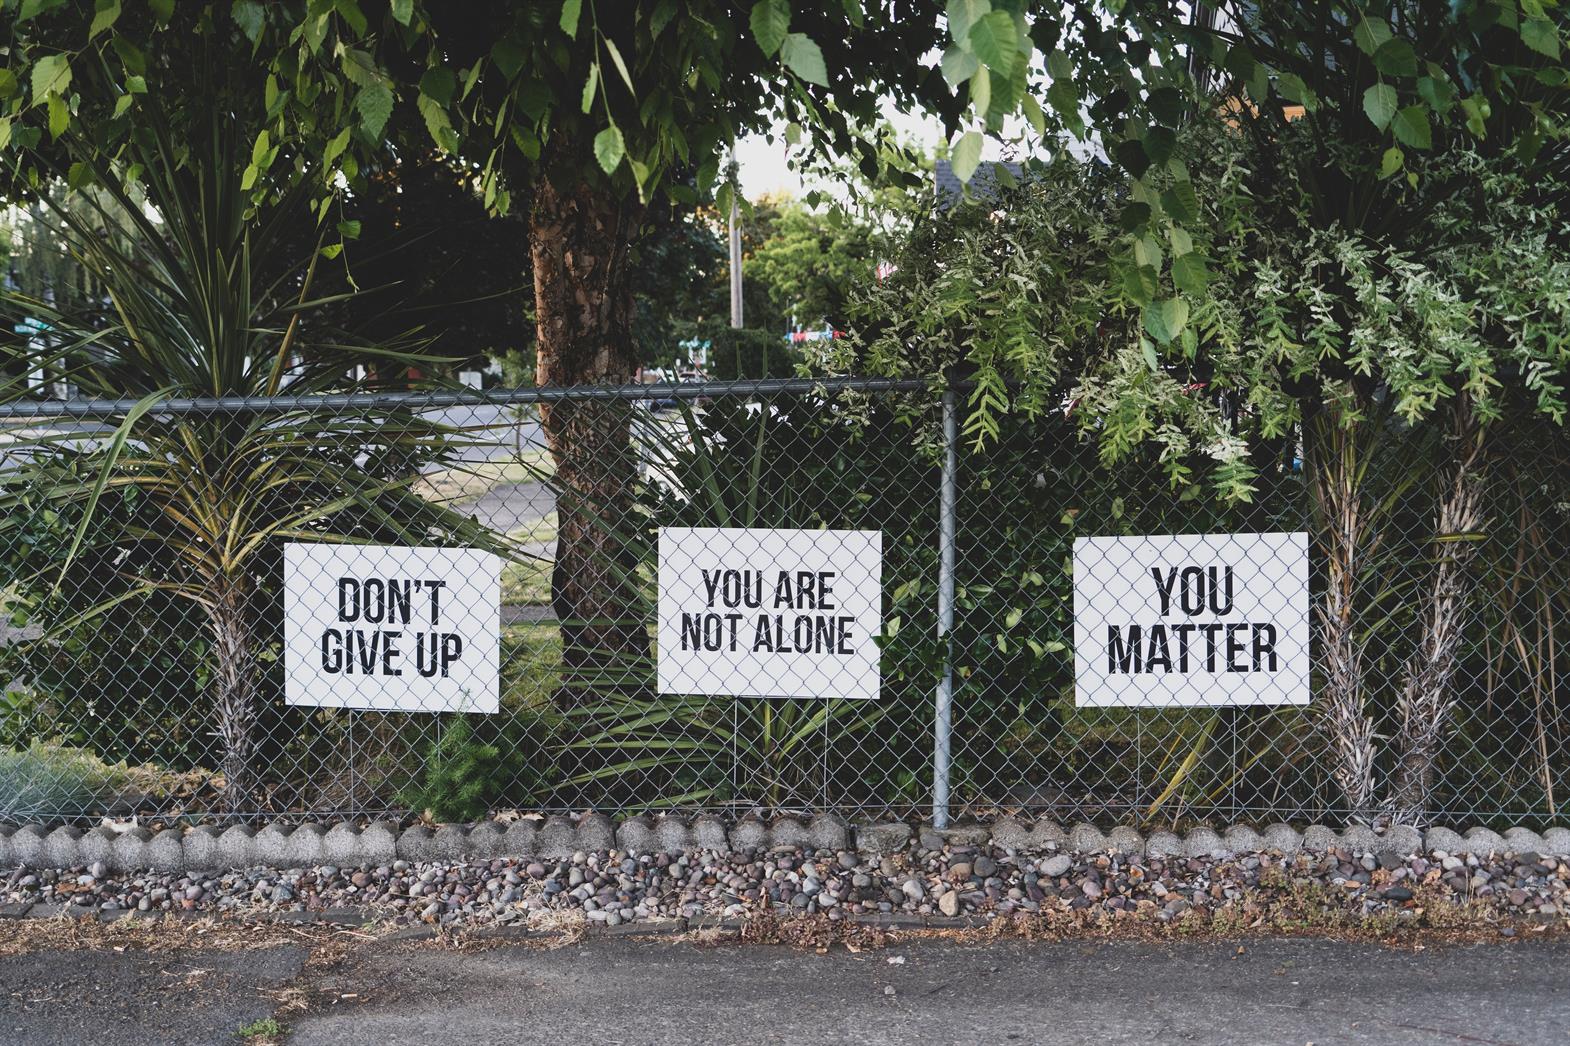 Sings on a fence that say "don't give up, you are not alone, you matter"